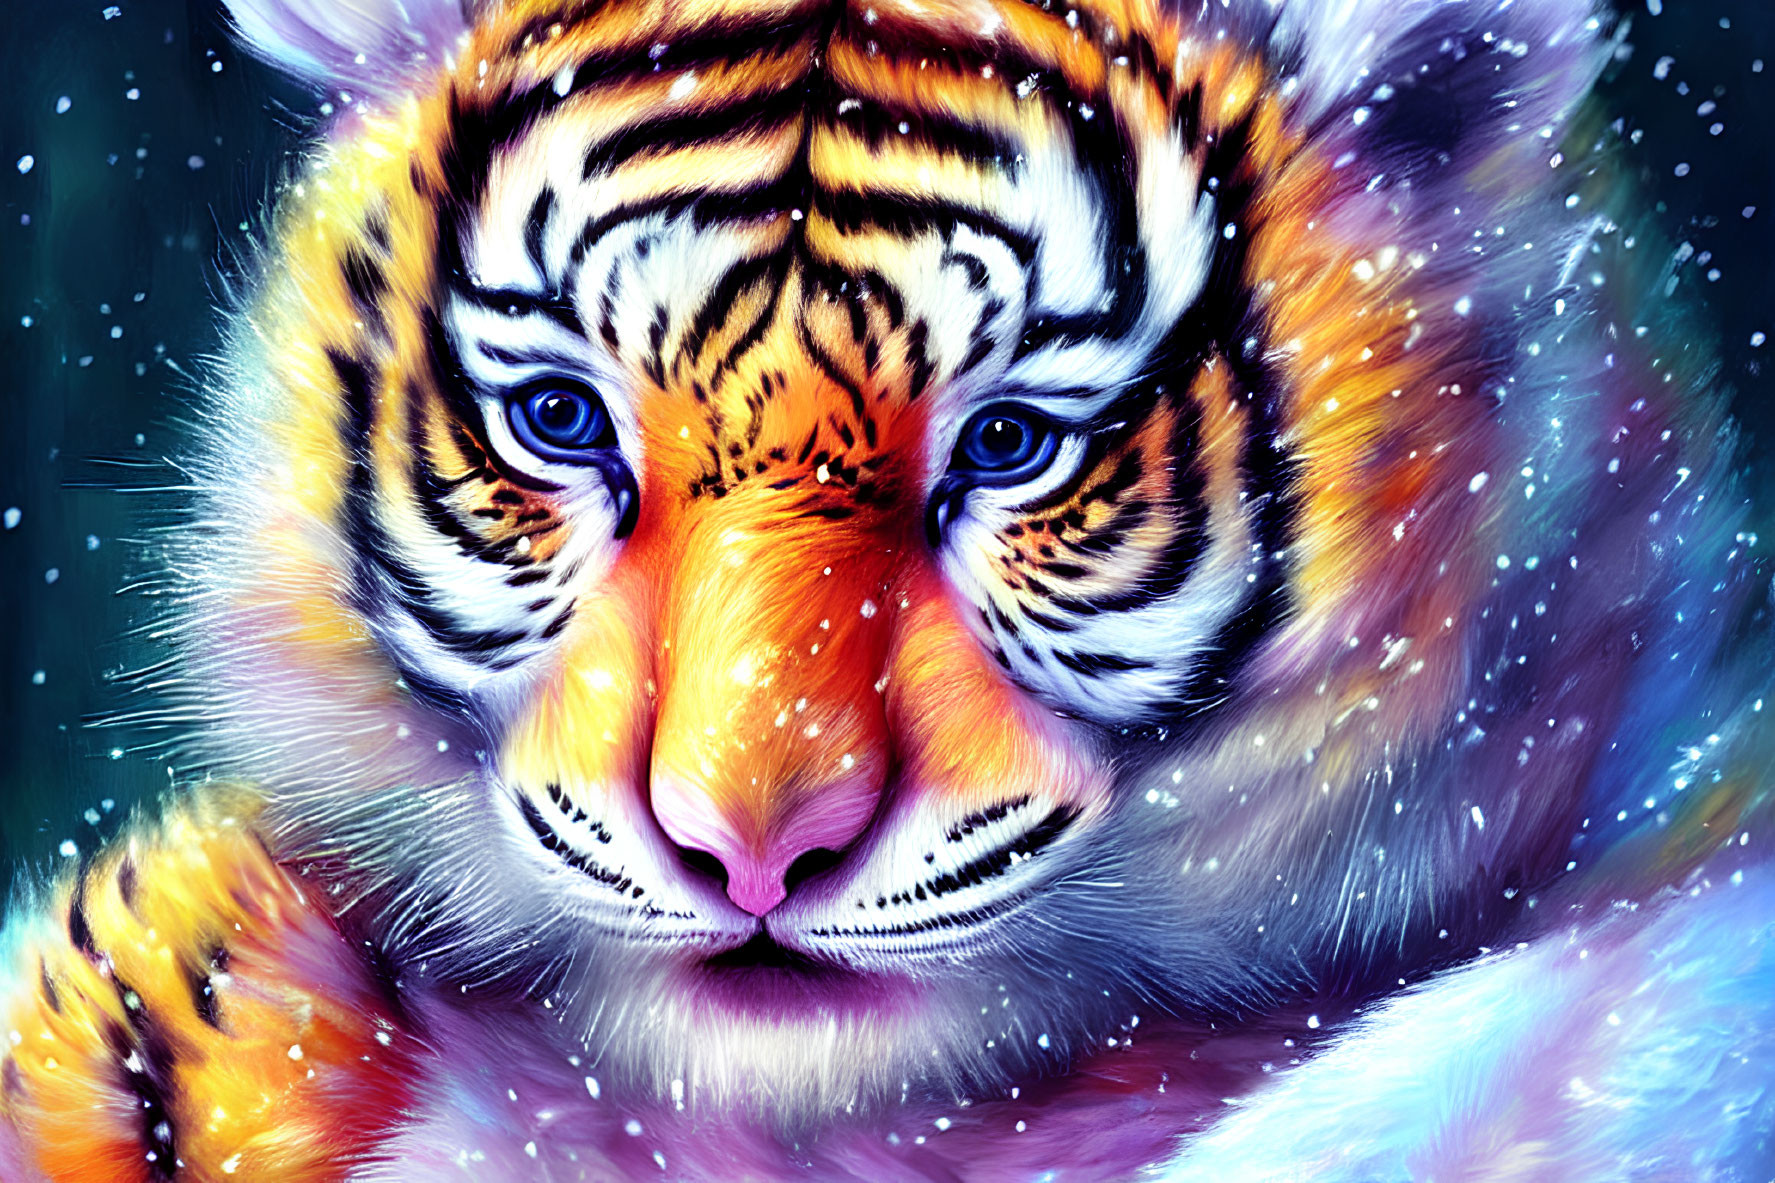 Colorful Tiger Face Artwork with Blue Eyes on Snowy Background